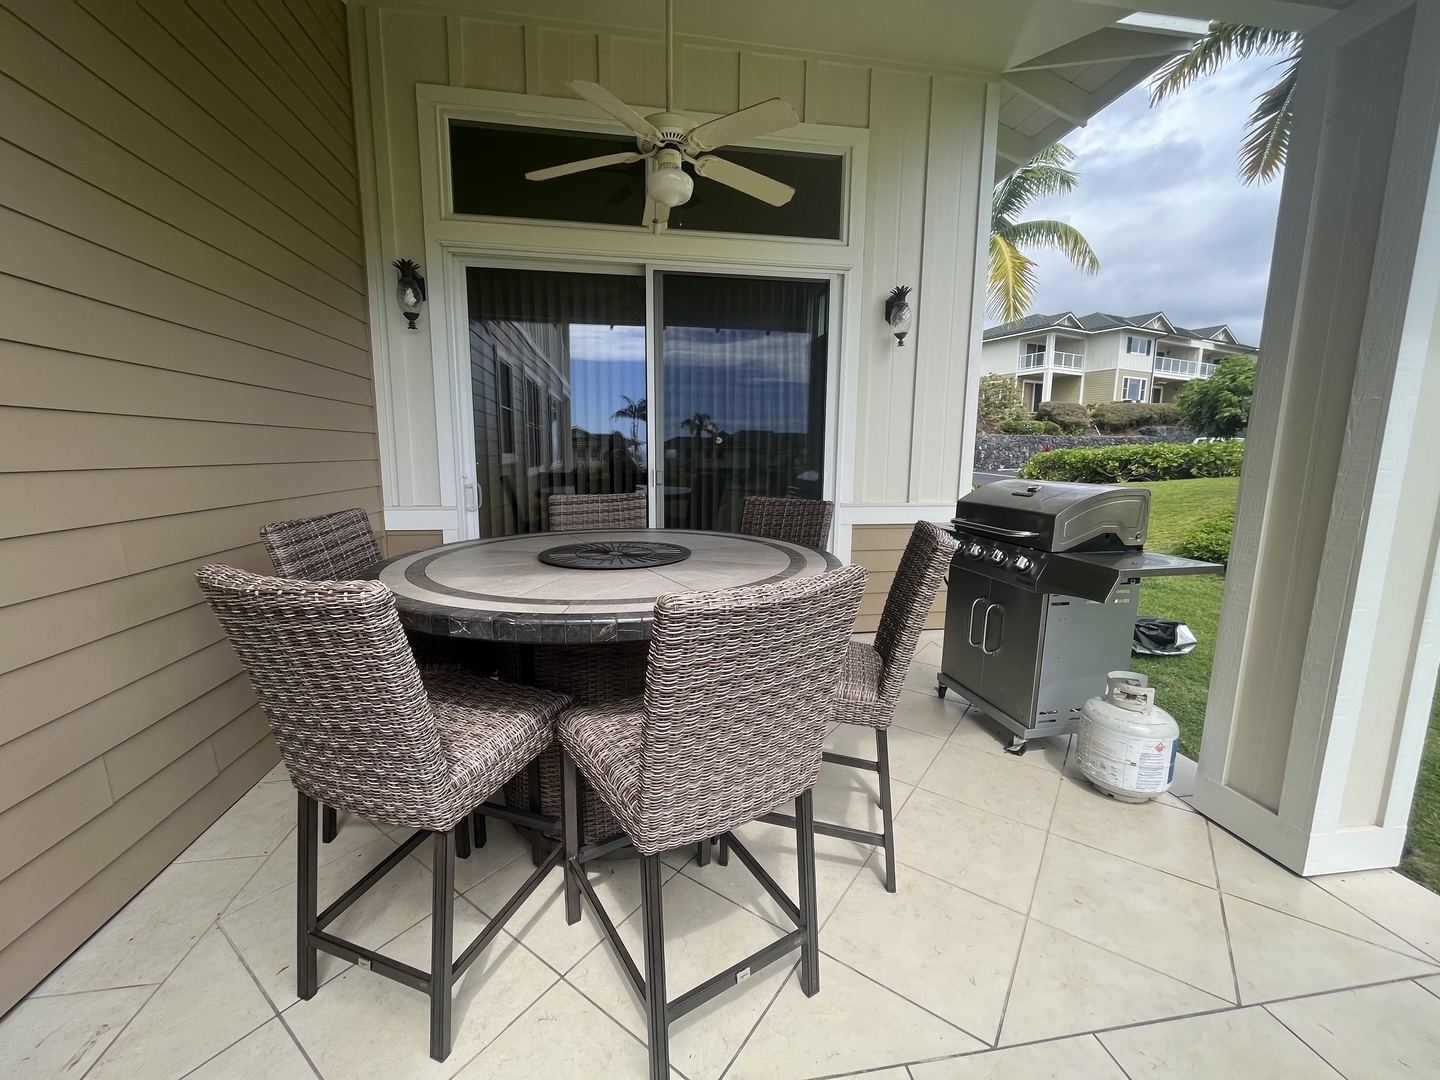 Lanai dining and propane grill